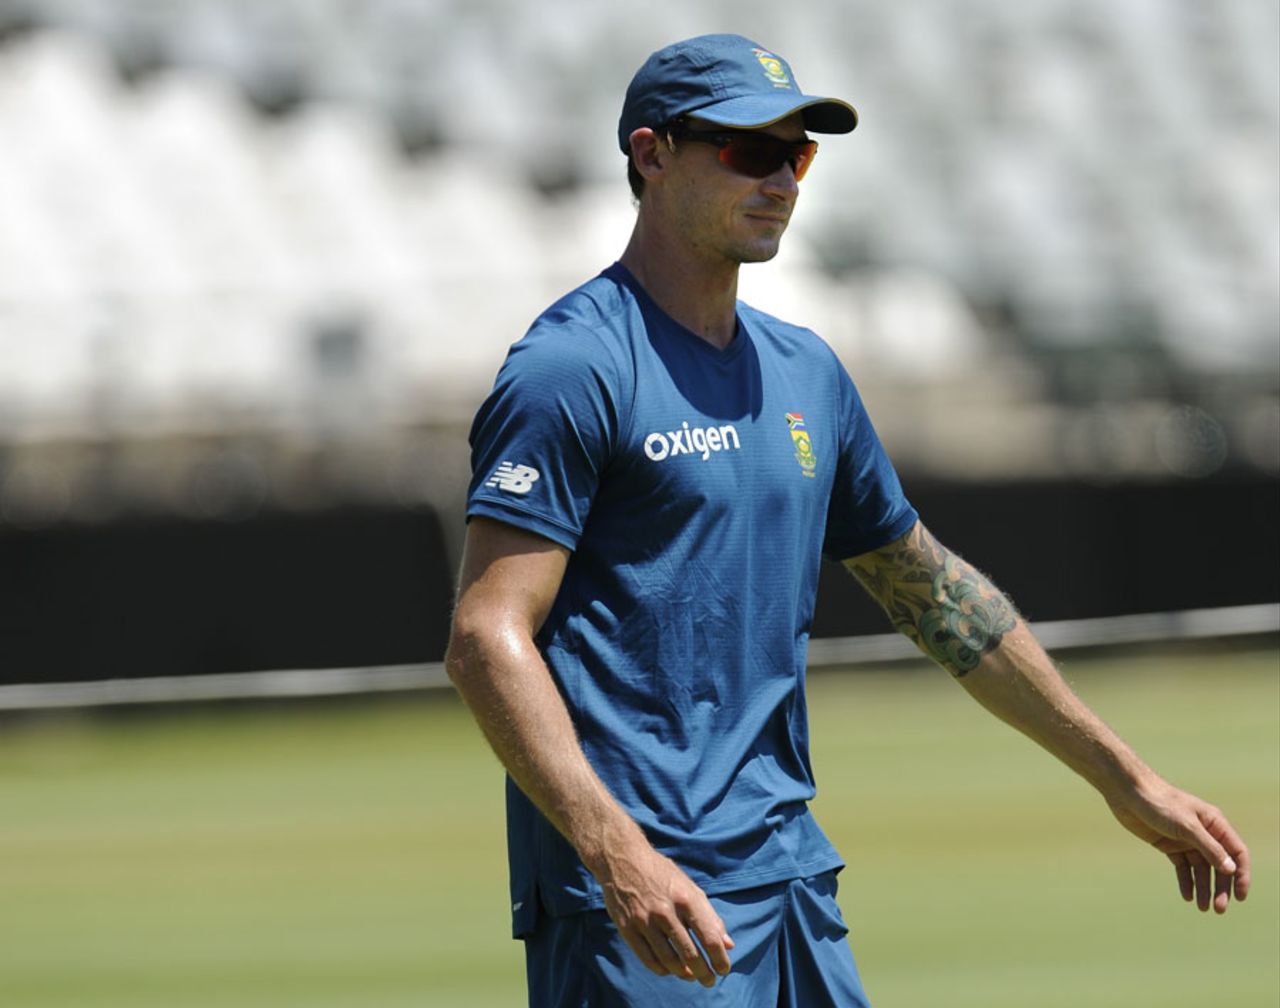 After diving with the sharks, Dale Steyn was back training with South Africa, Cape Town, February 17, 2016